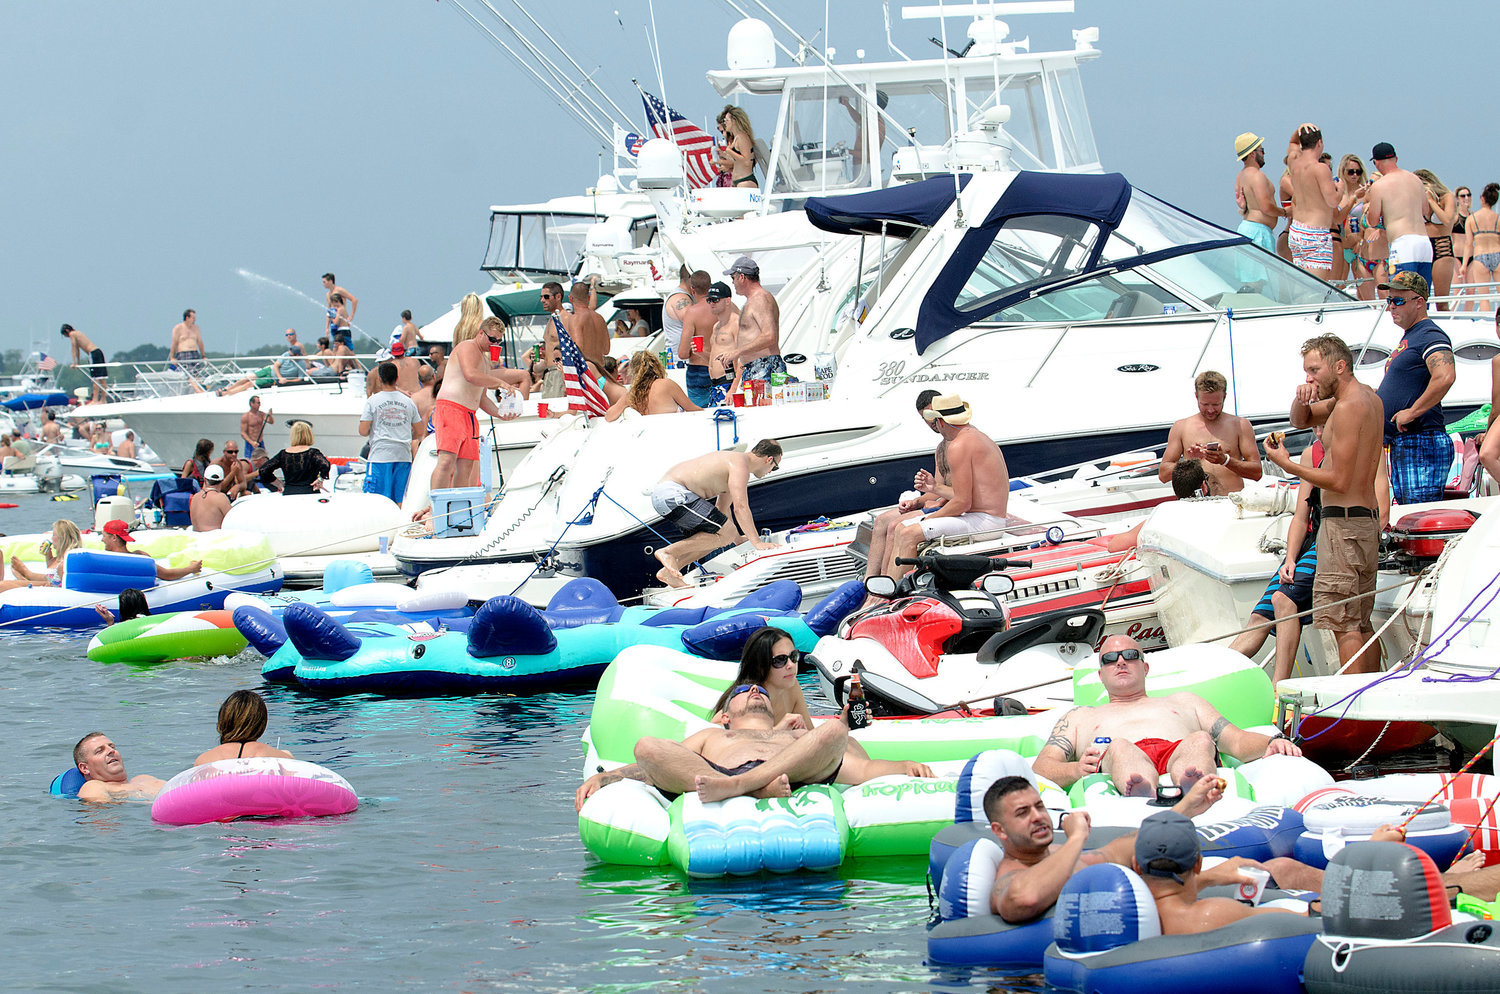 The annual party on the water known as “Aquapalooza” returned to Potters Cove, Prudence Island, on Saturday, drawing more than 1,000 boats and jet skis. (File photo)